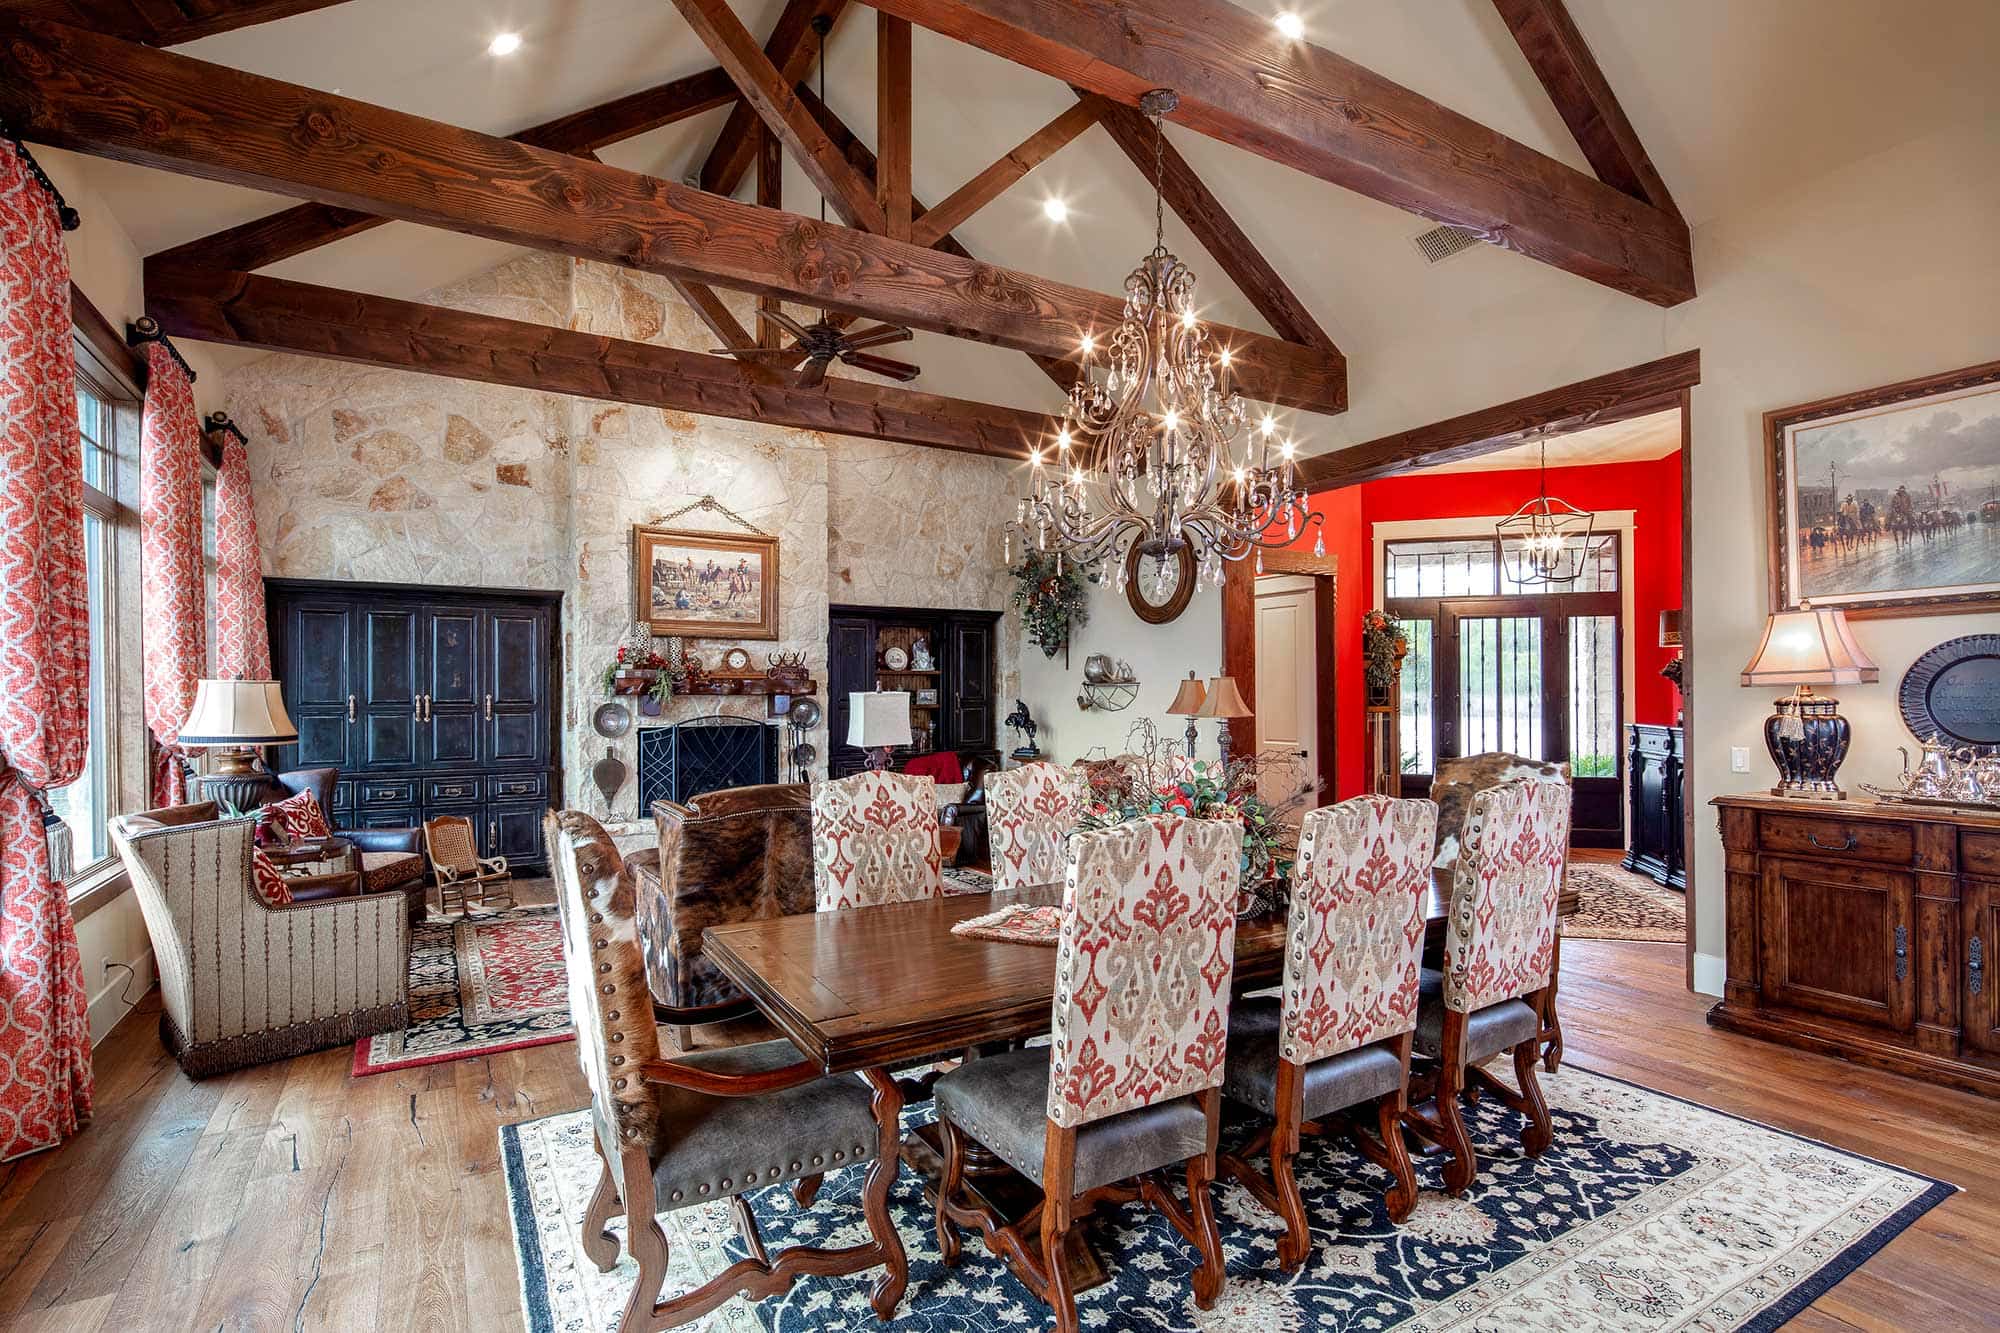 3845 Texas Hill Country Rustic 04 Inspiration LG 37